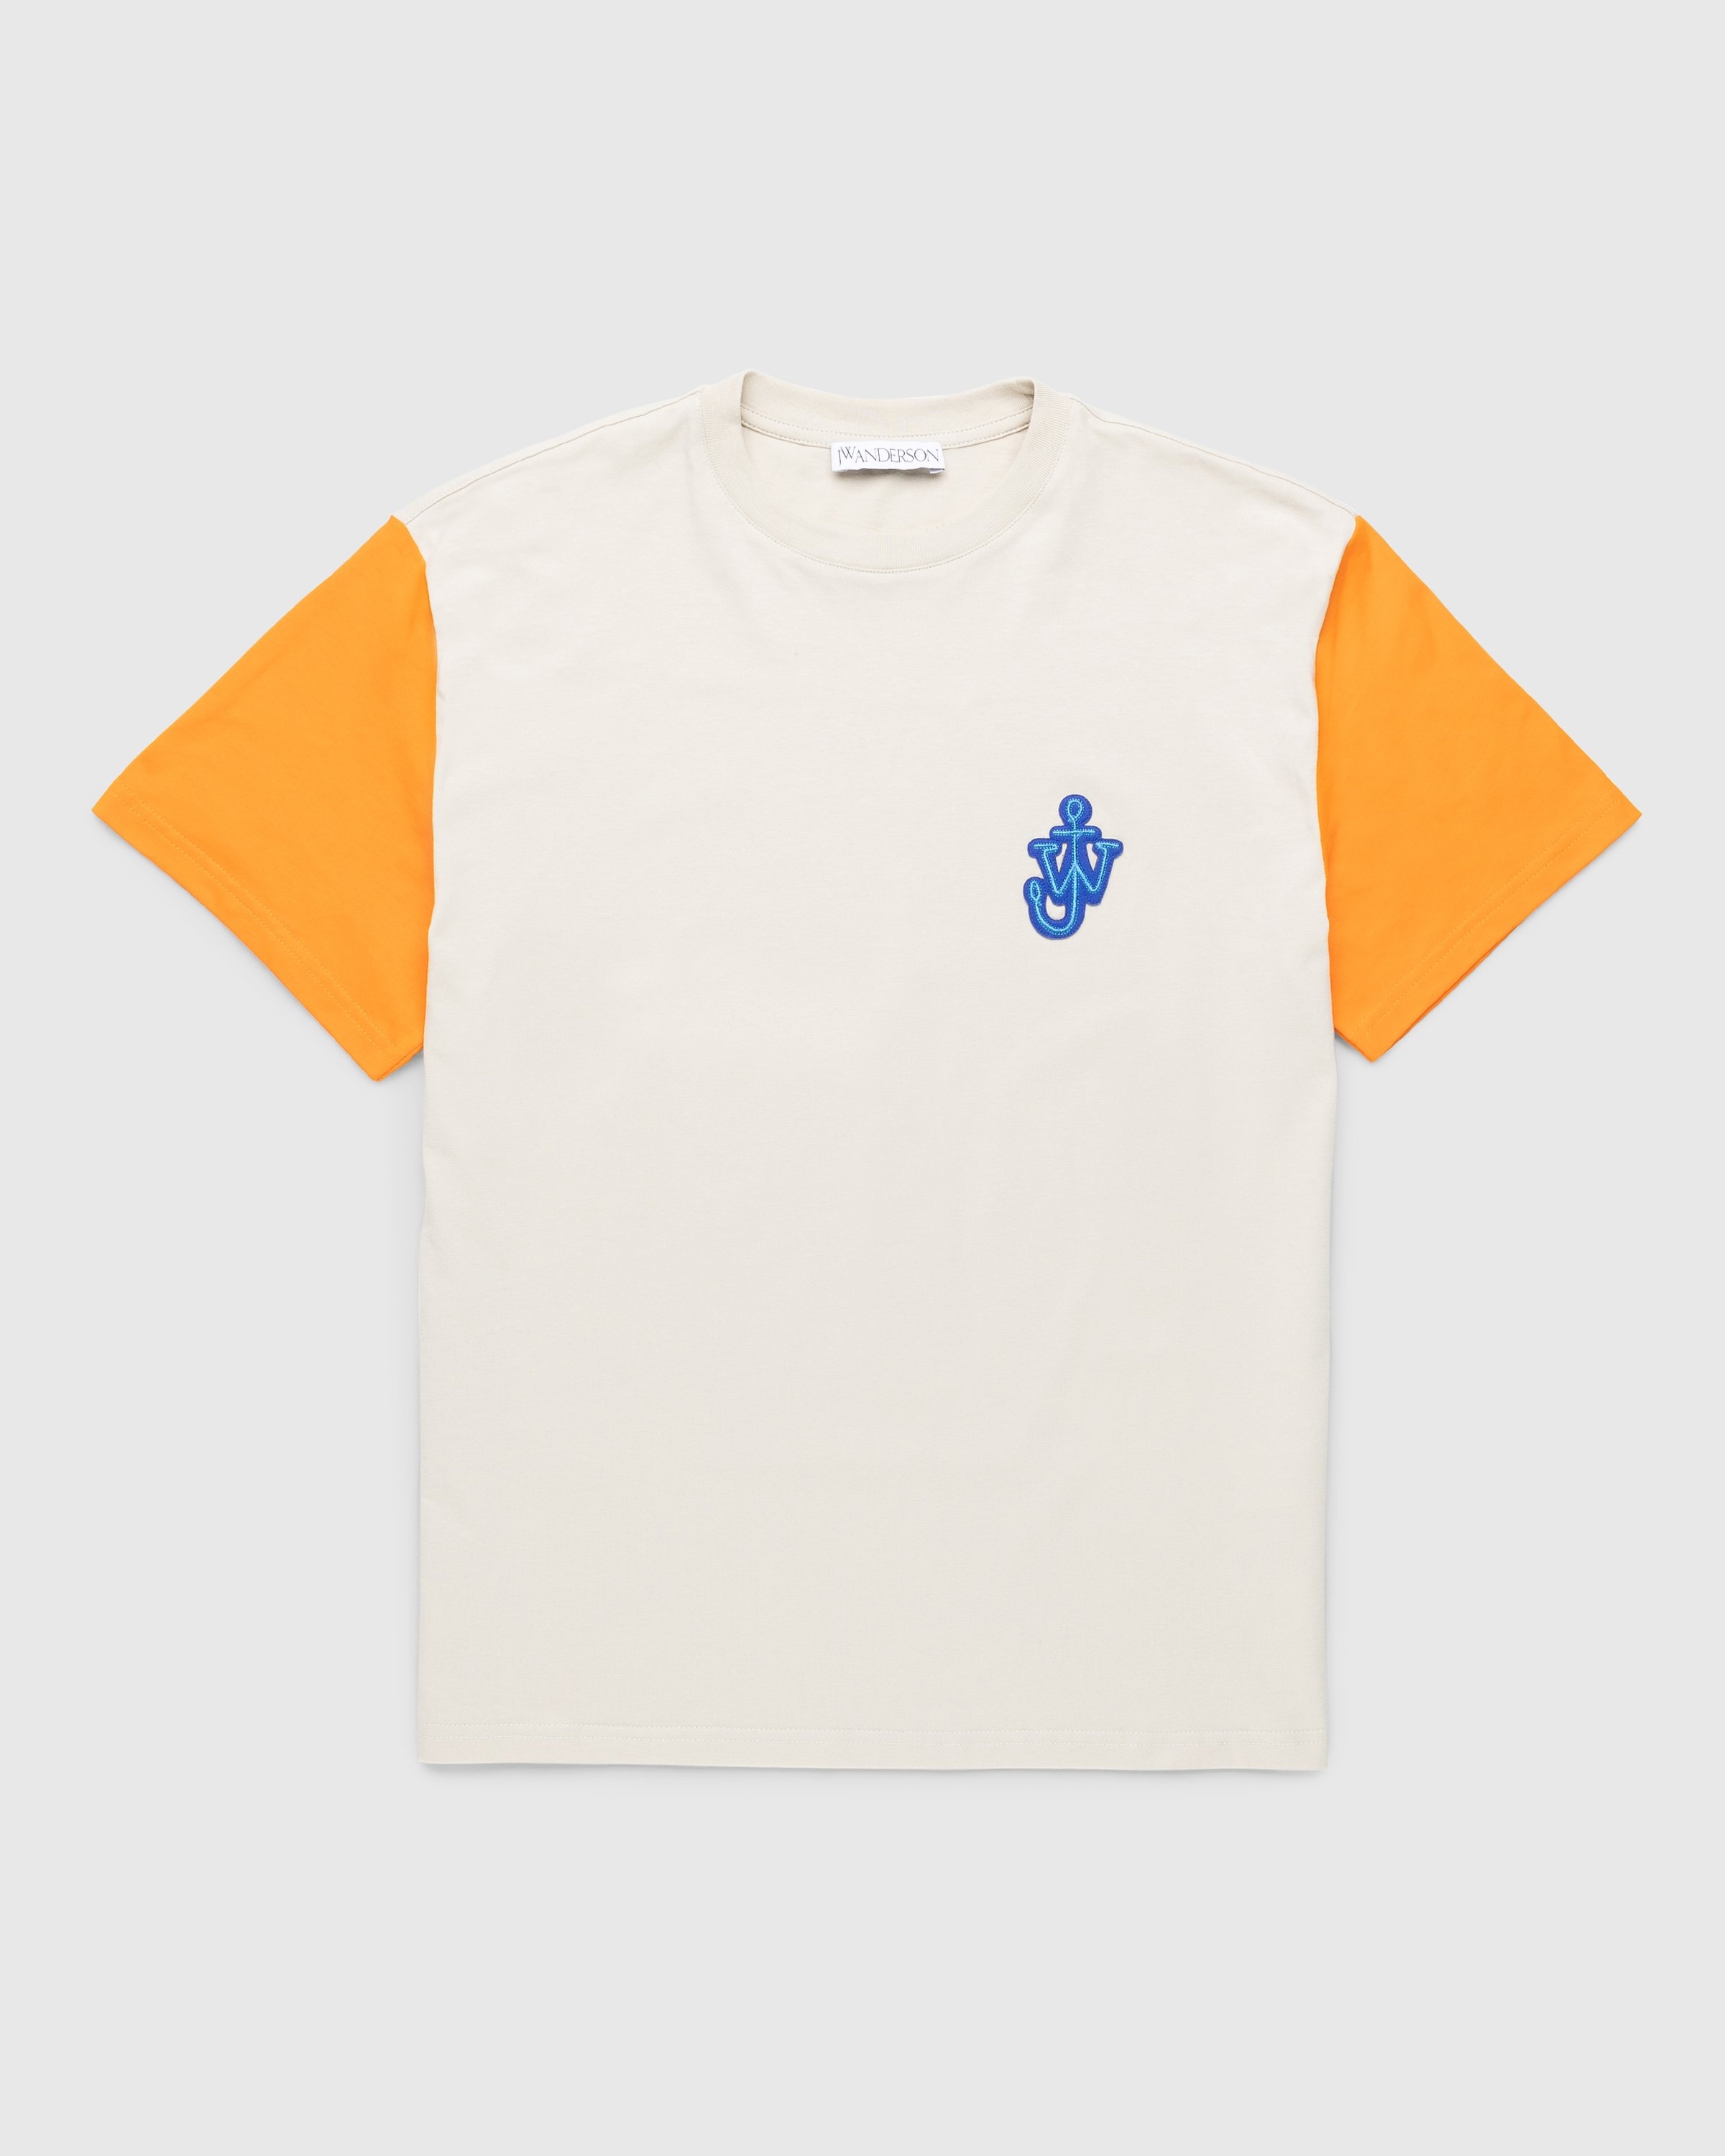 J.W. Anderson – Anchor Patch Contrast Sleeve T-Shirt - T-shirts - Orange - Image 1